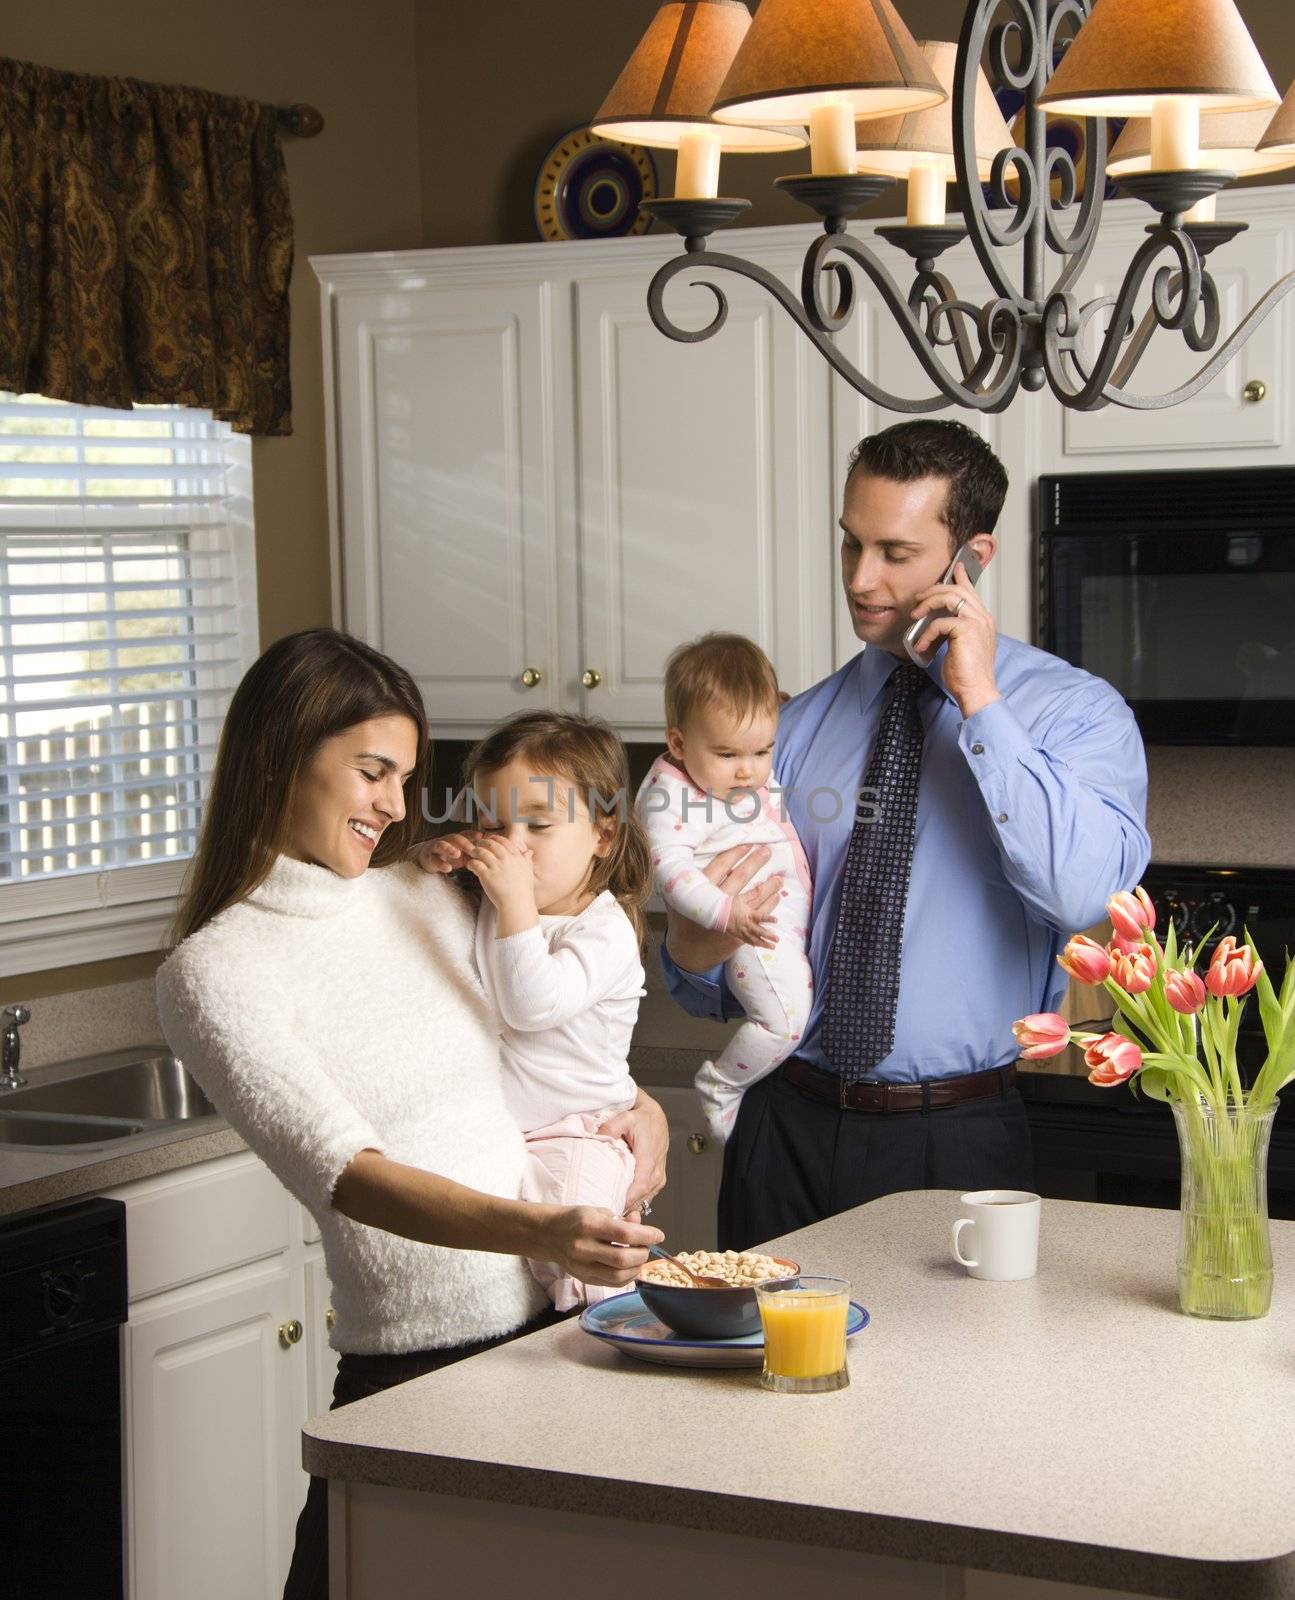 Caucasian mother and father in kitchen busy with children and cellphone.